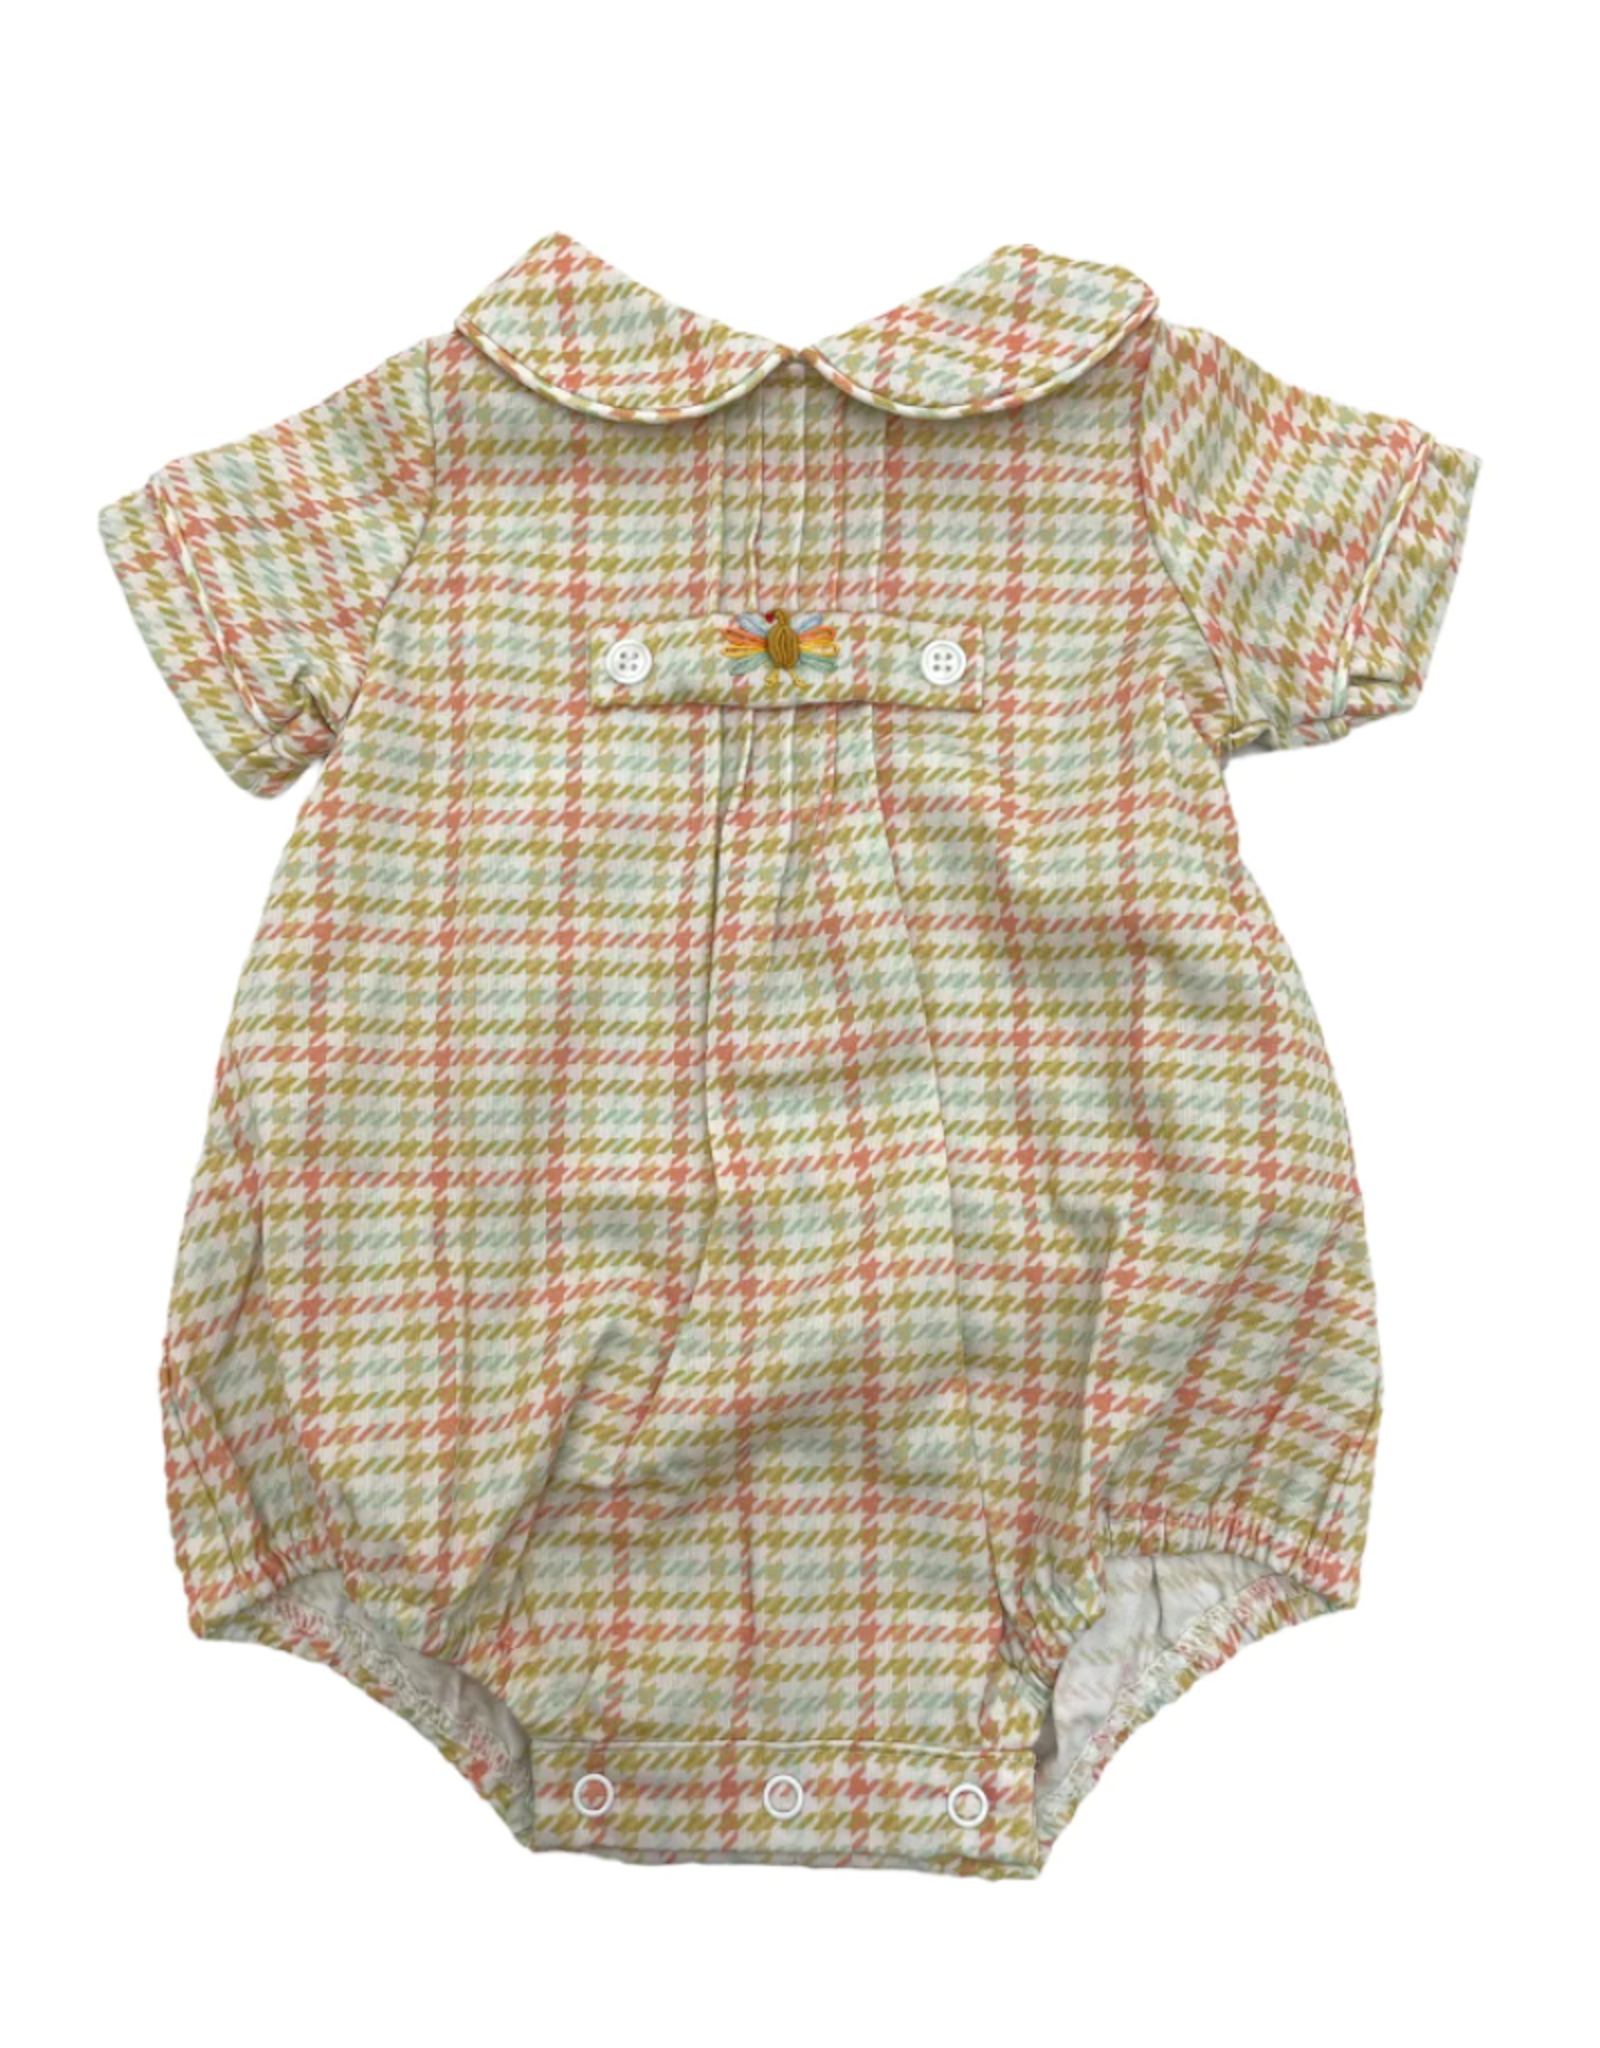 Peggy Green Anderson Bubble, Butternut Plaid with Turkey Tab